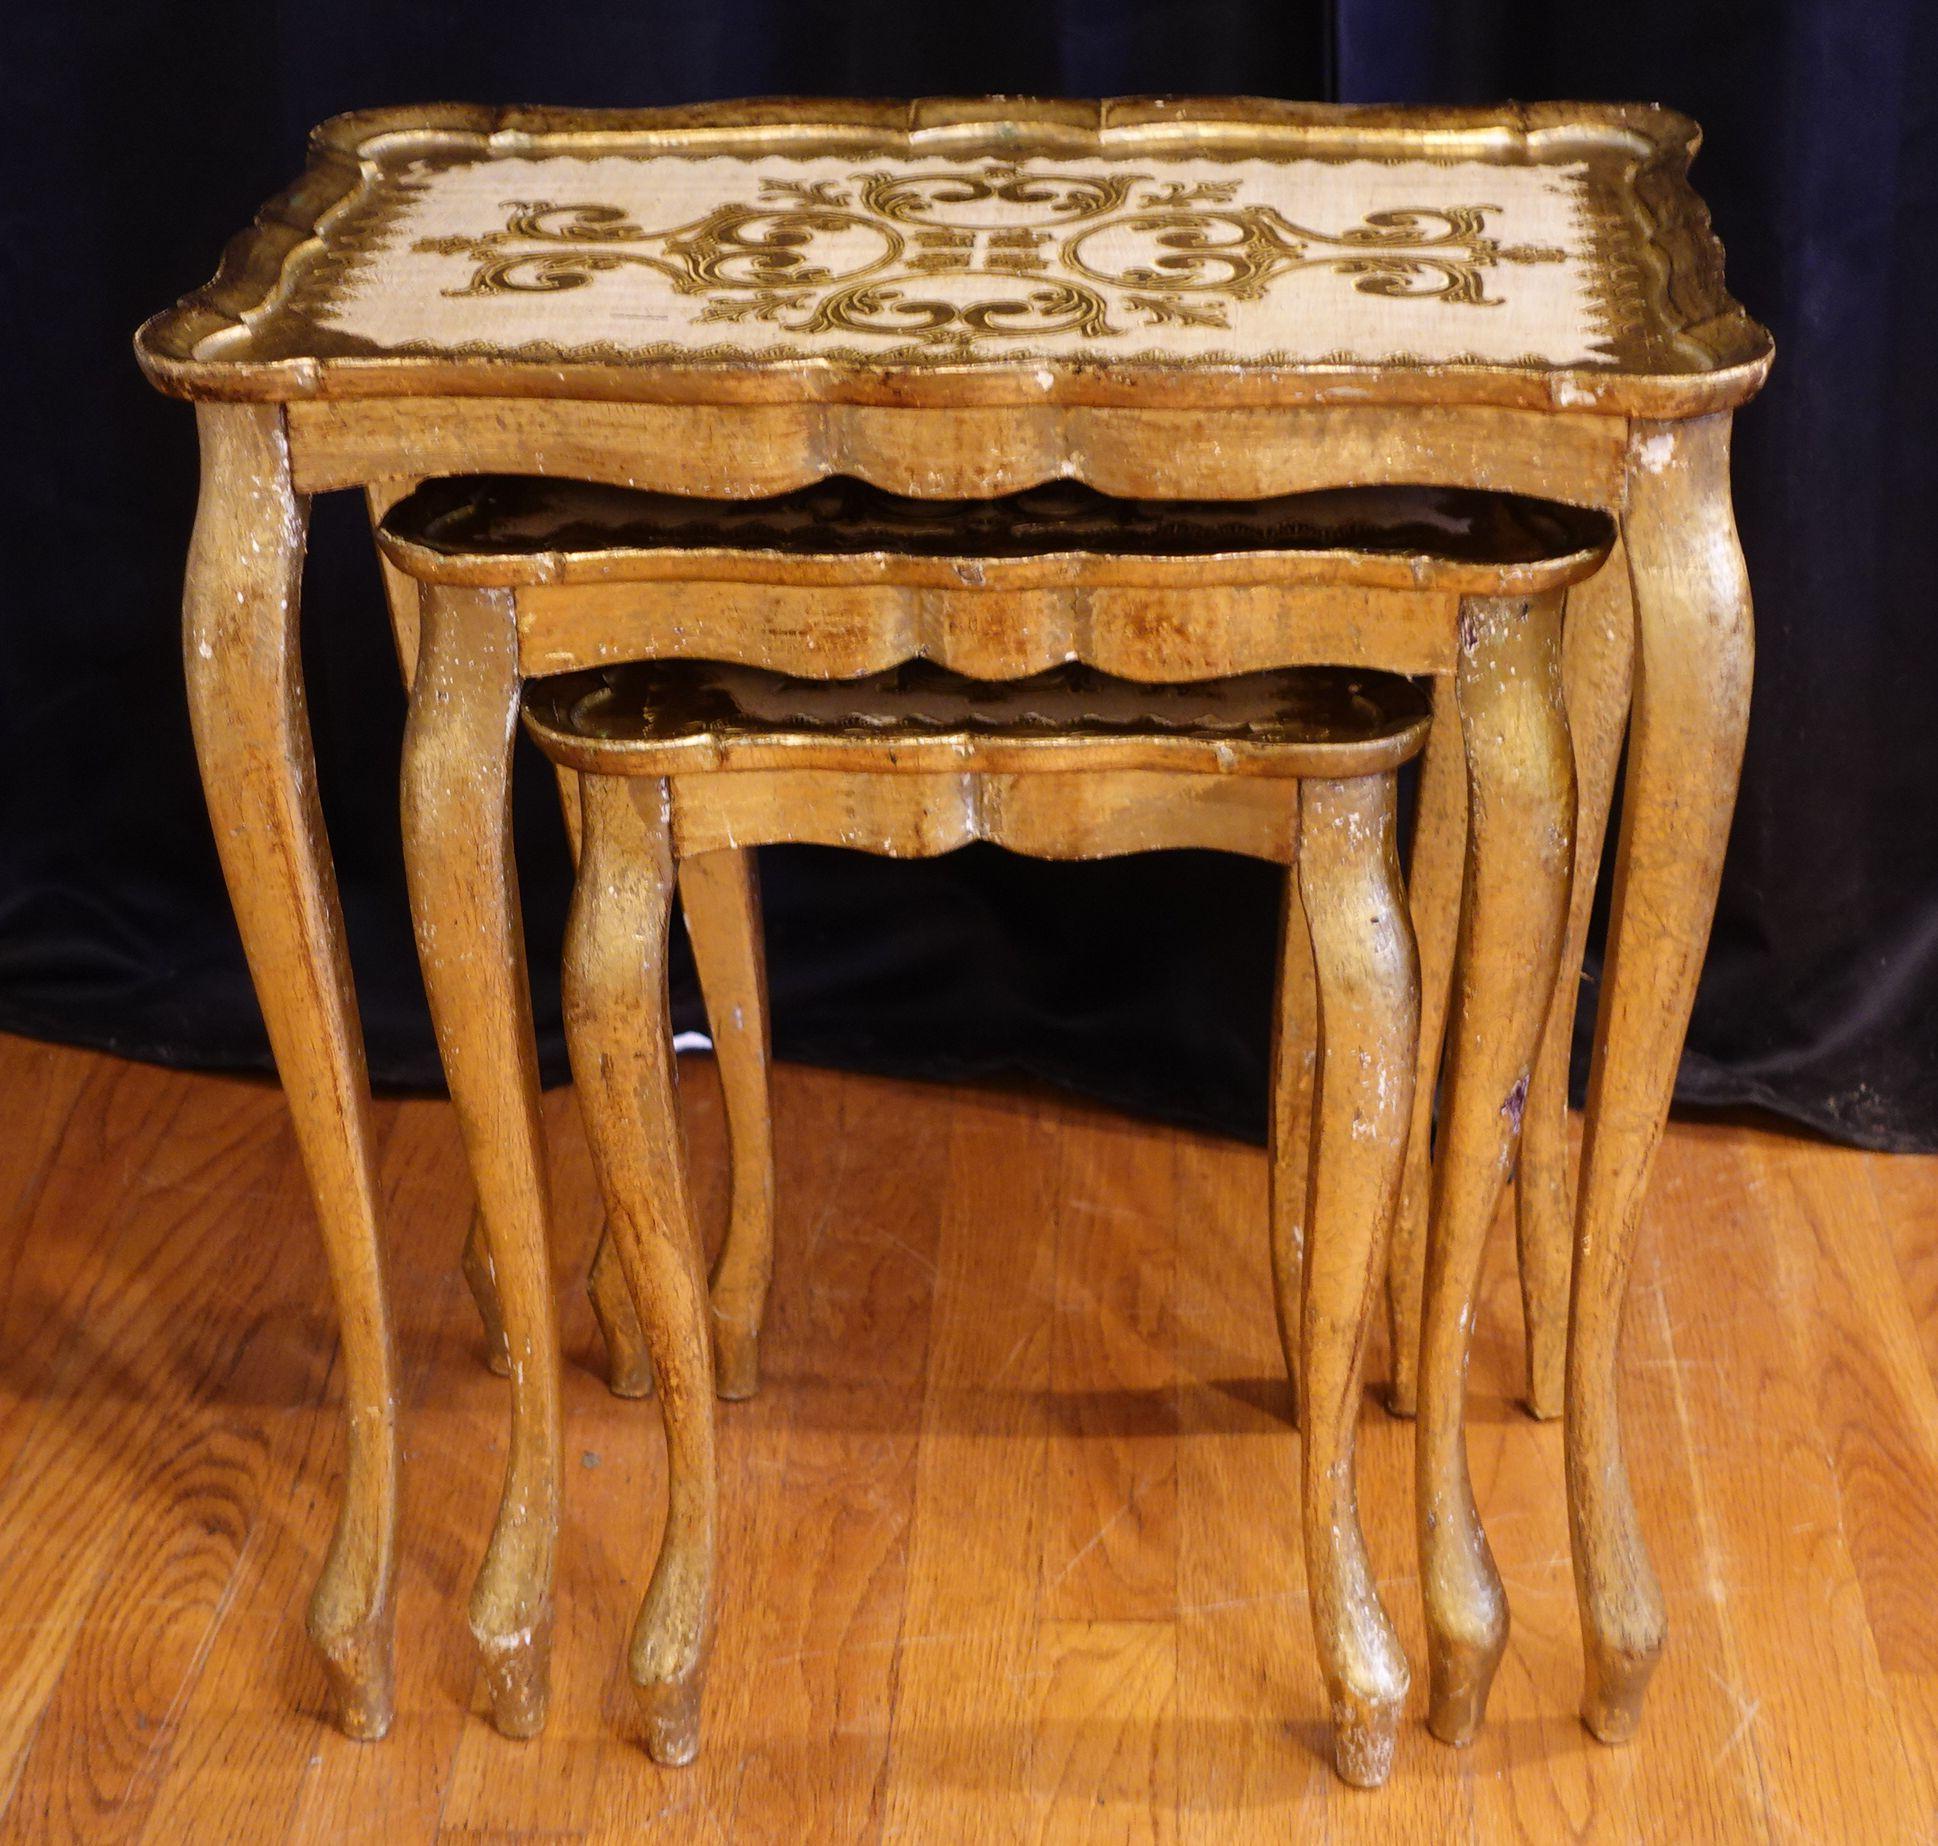 Three Florentine-style nesting tables were made in Italy, circa 1960. They feature cabriole legs and intricate hand-painted details on the tabletops with scalloped edges. The gilded wood has a beautifully weathered patina. The tall table is approx.